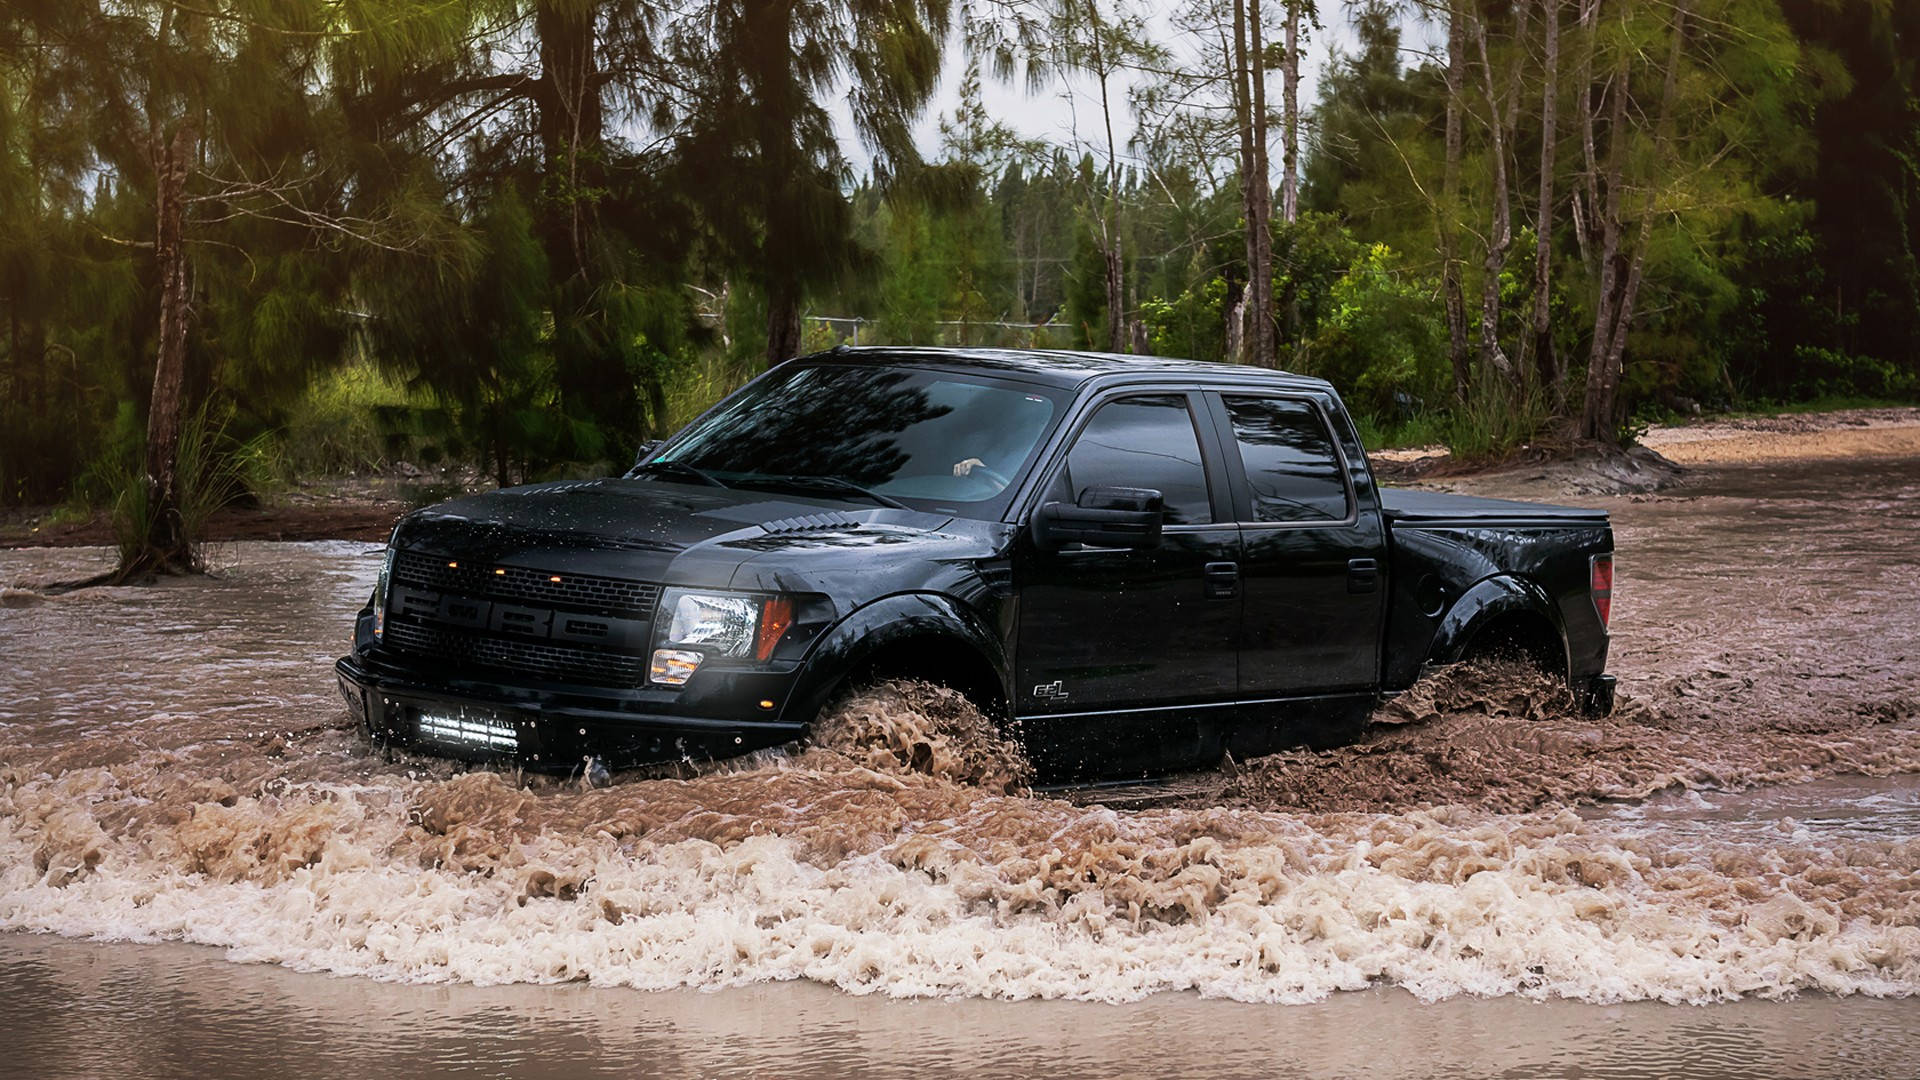 Caption: Ford Raptor embracing the flooded terrain Wallpaper